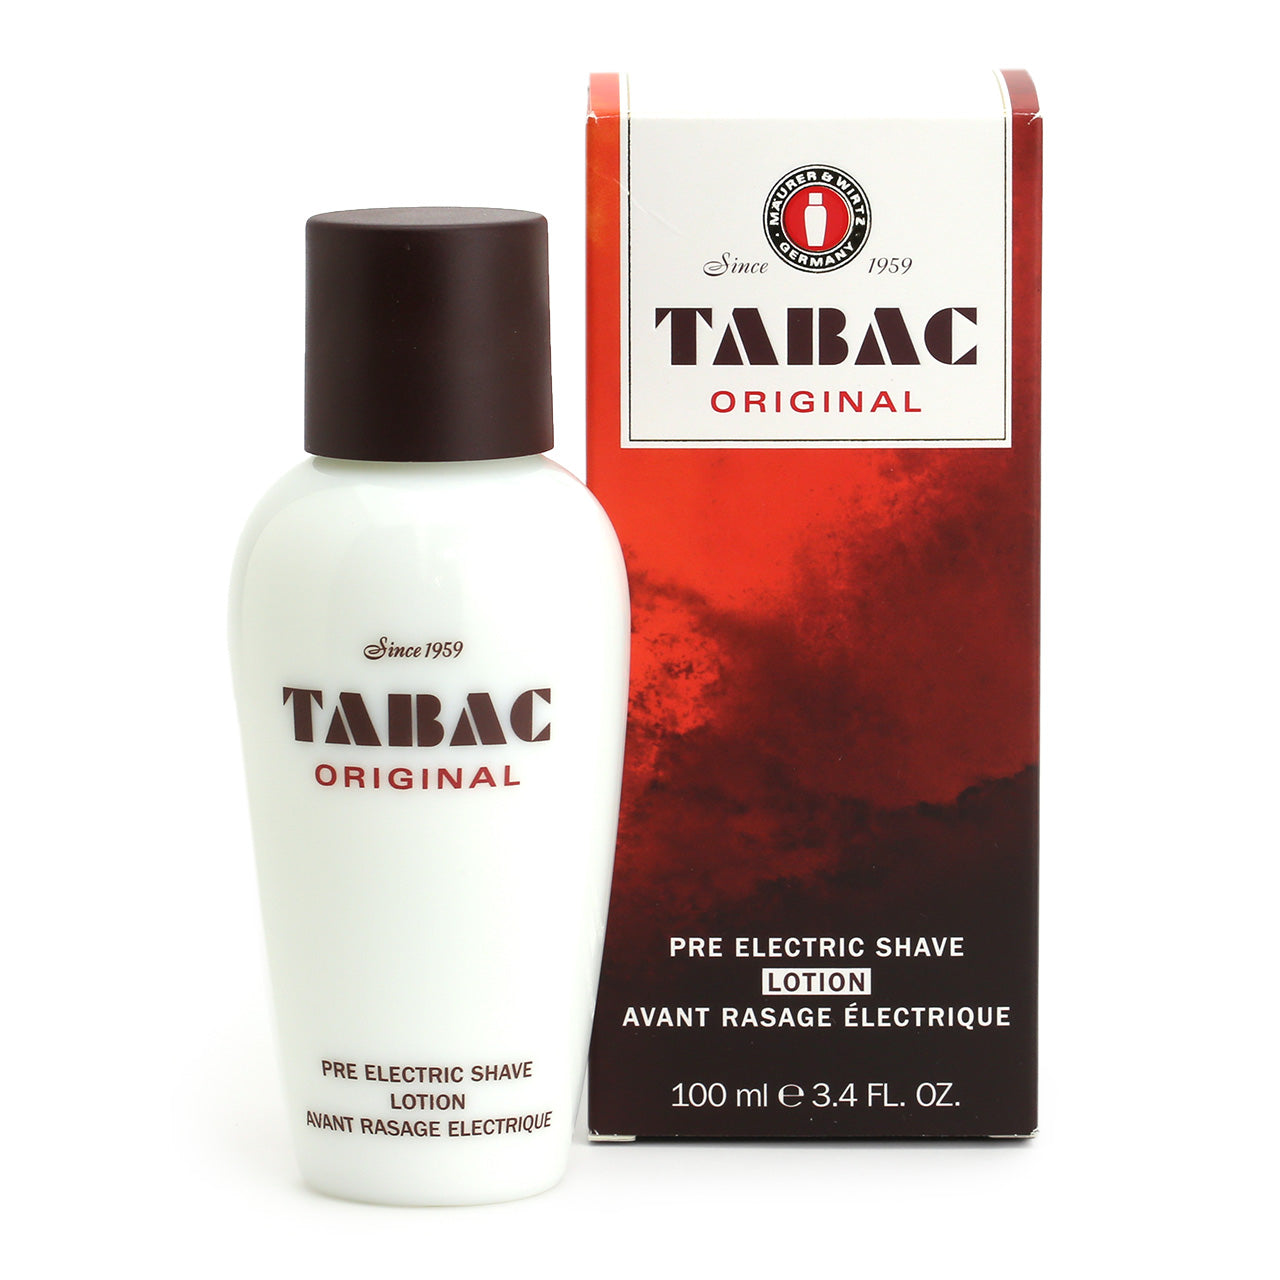 Tabac Original Pre-Electric Shave Lotion  in a heavy white glass bottle with restrictor